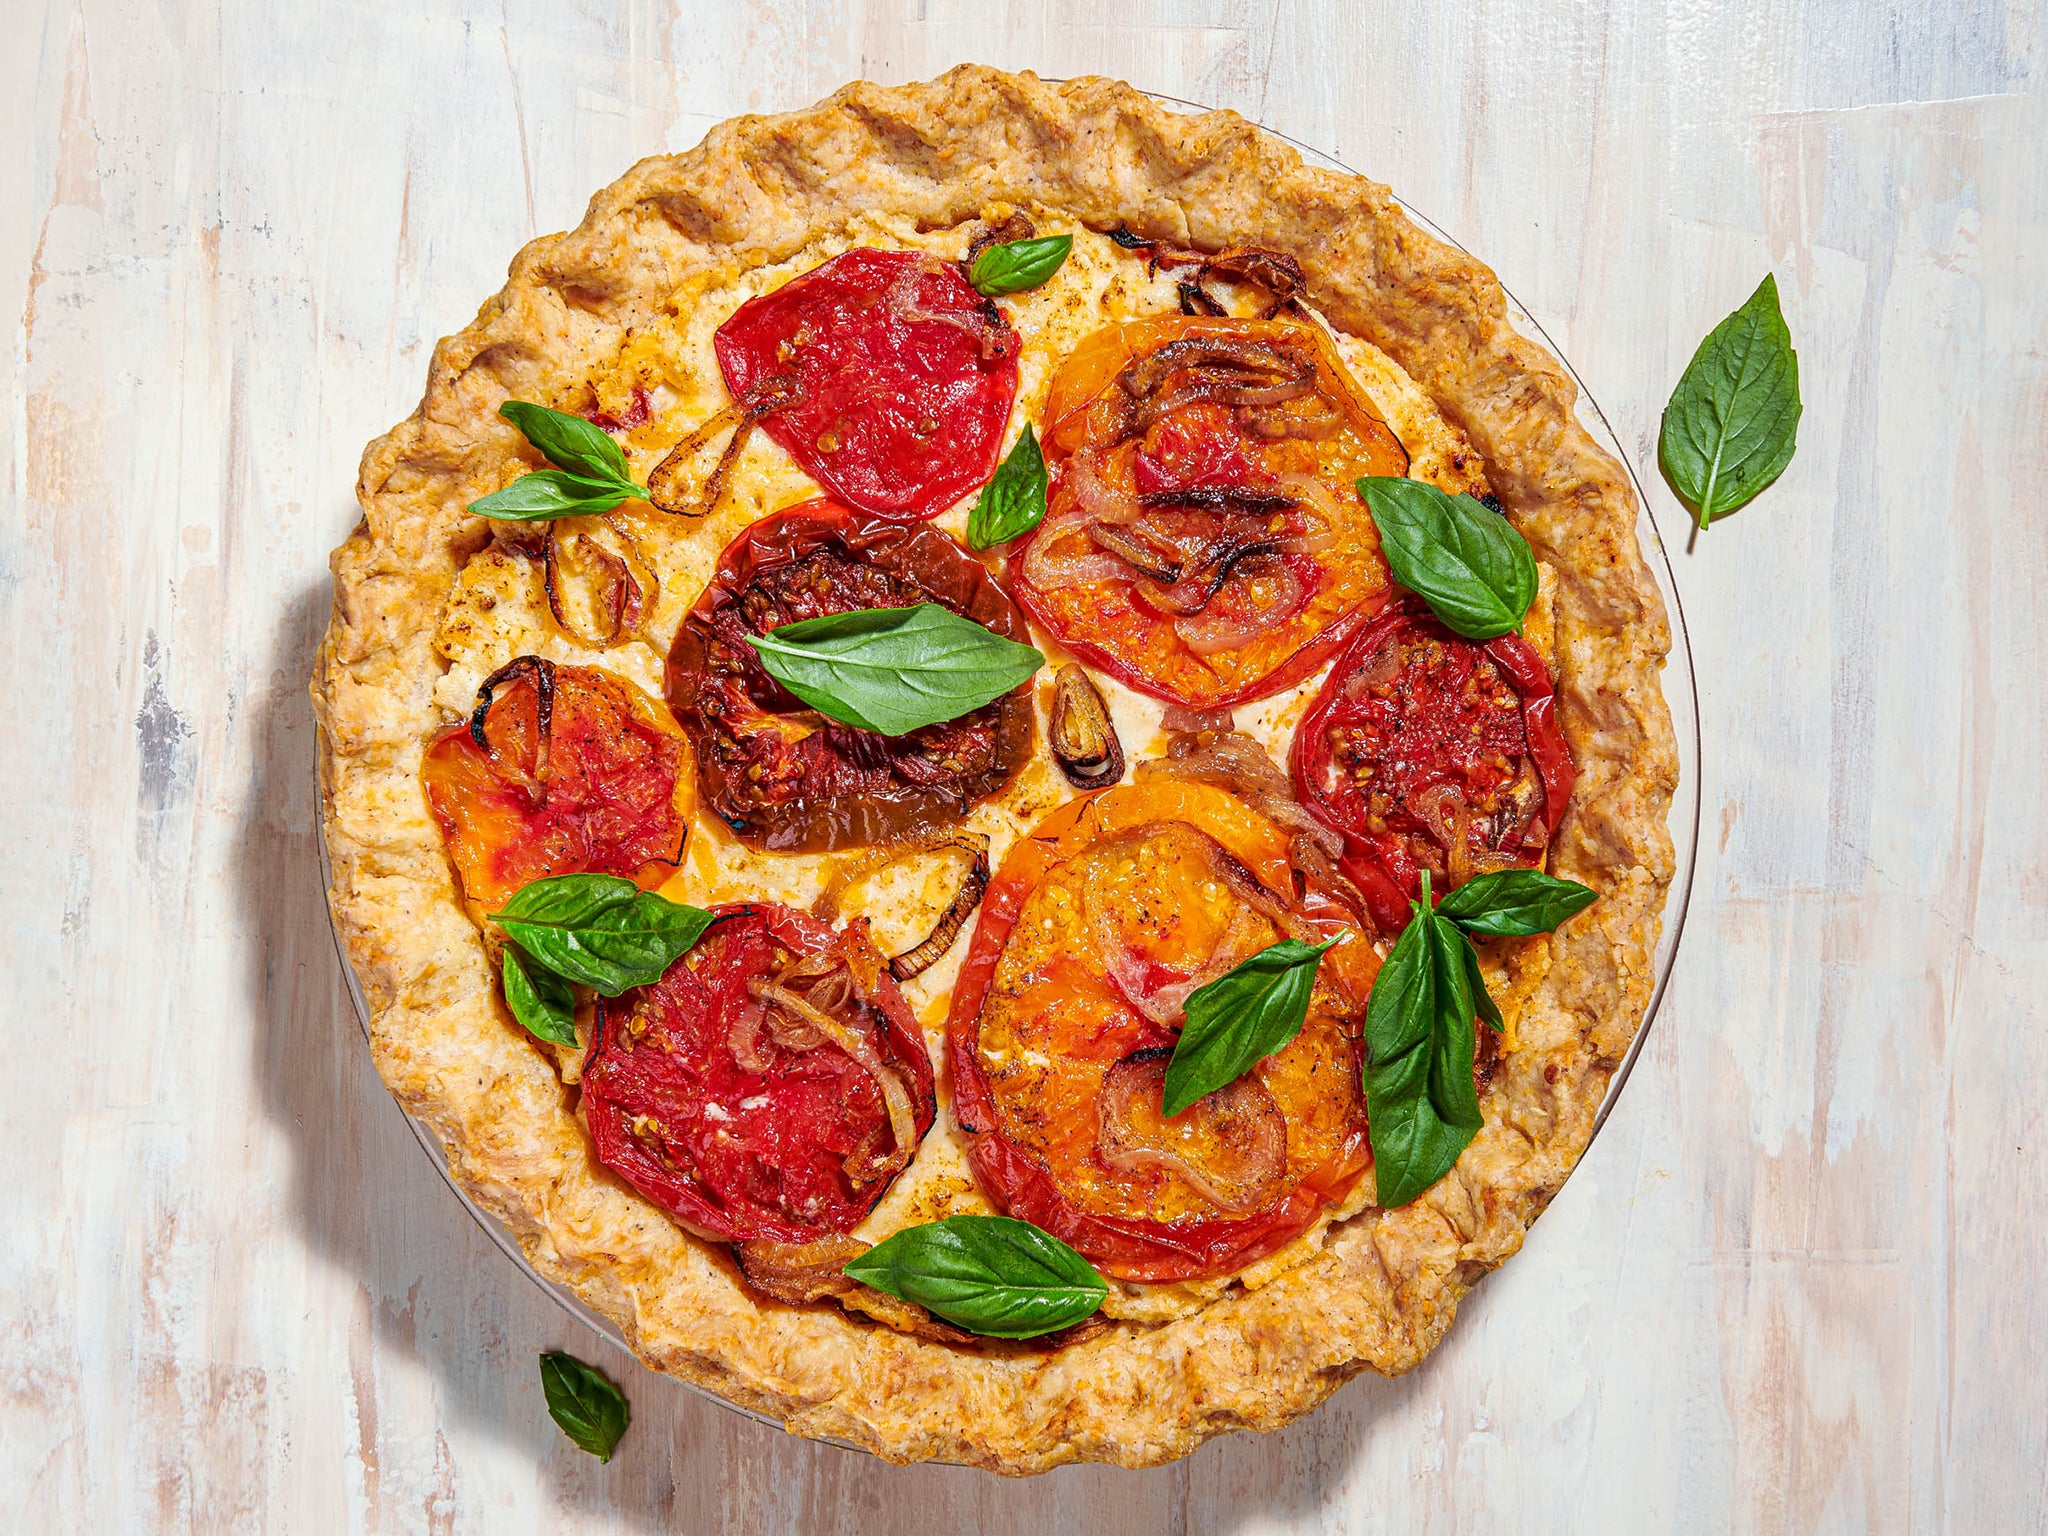 The origins of the tomato pie are a mystery